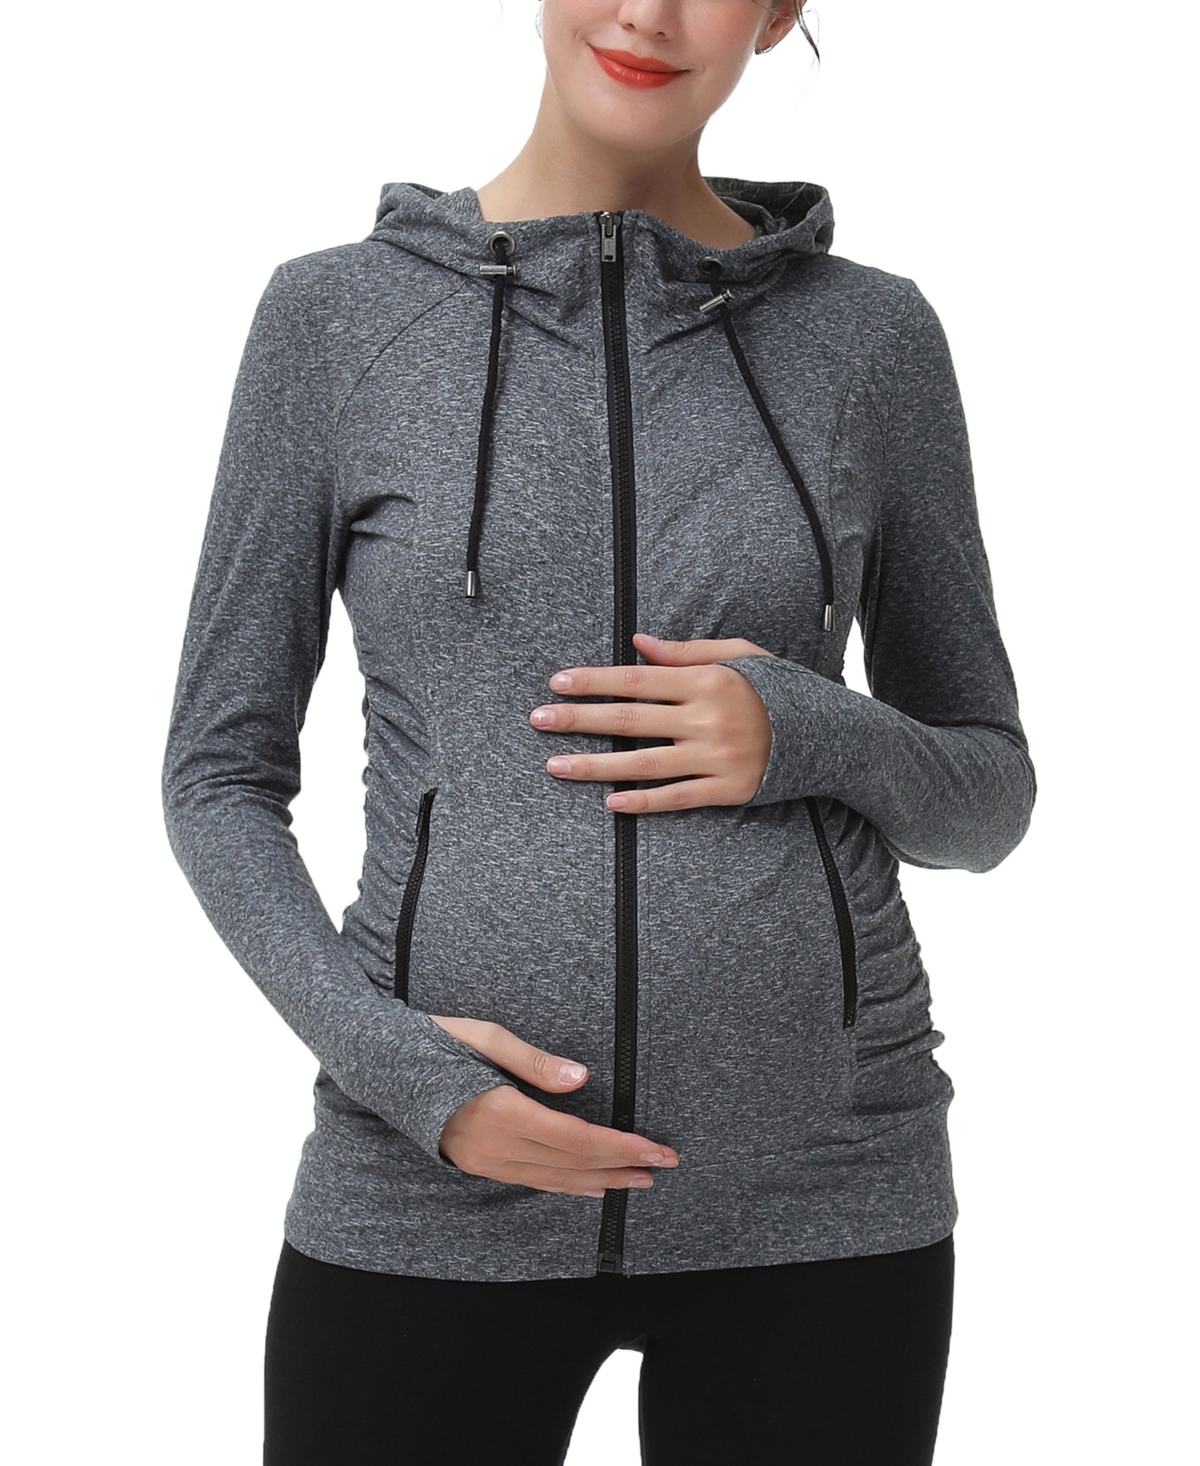 kimi + kai Maternity Essential Ruched Hooded Active Jacket - Maple red